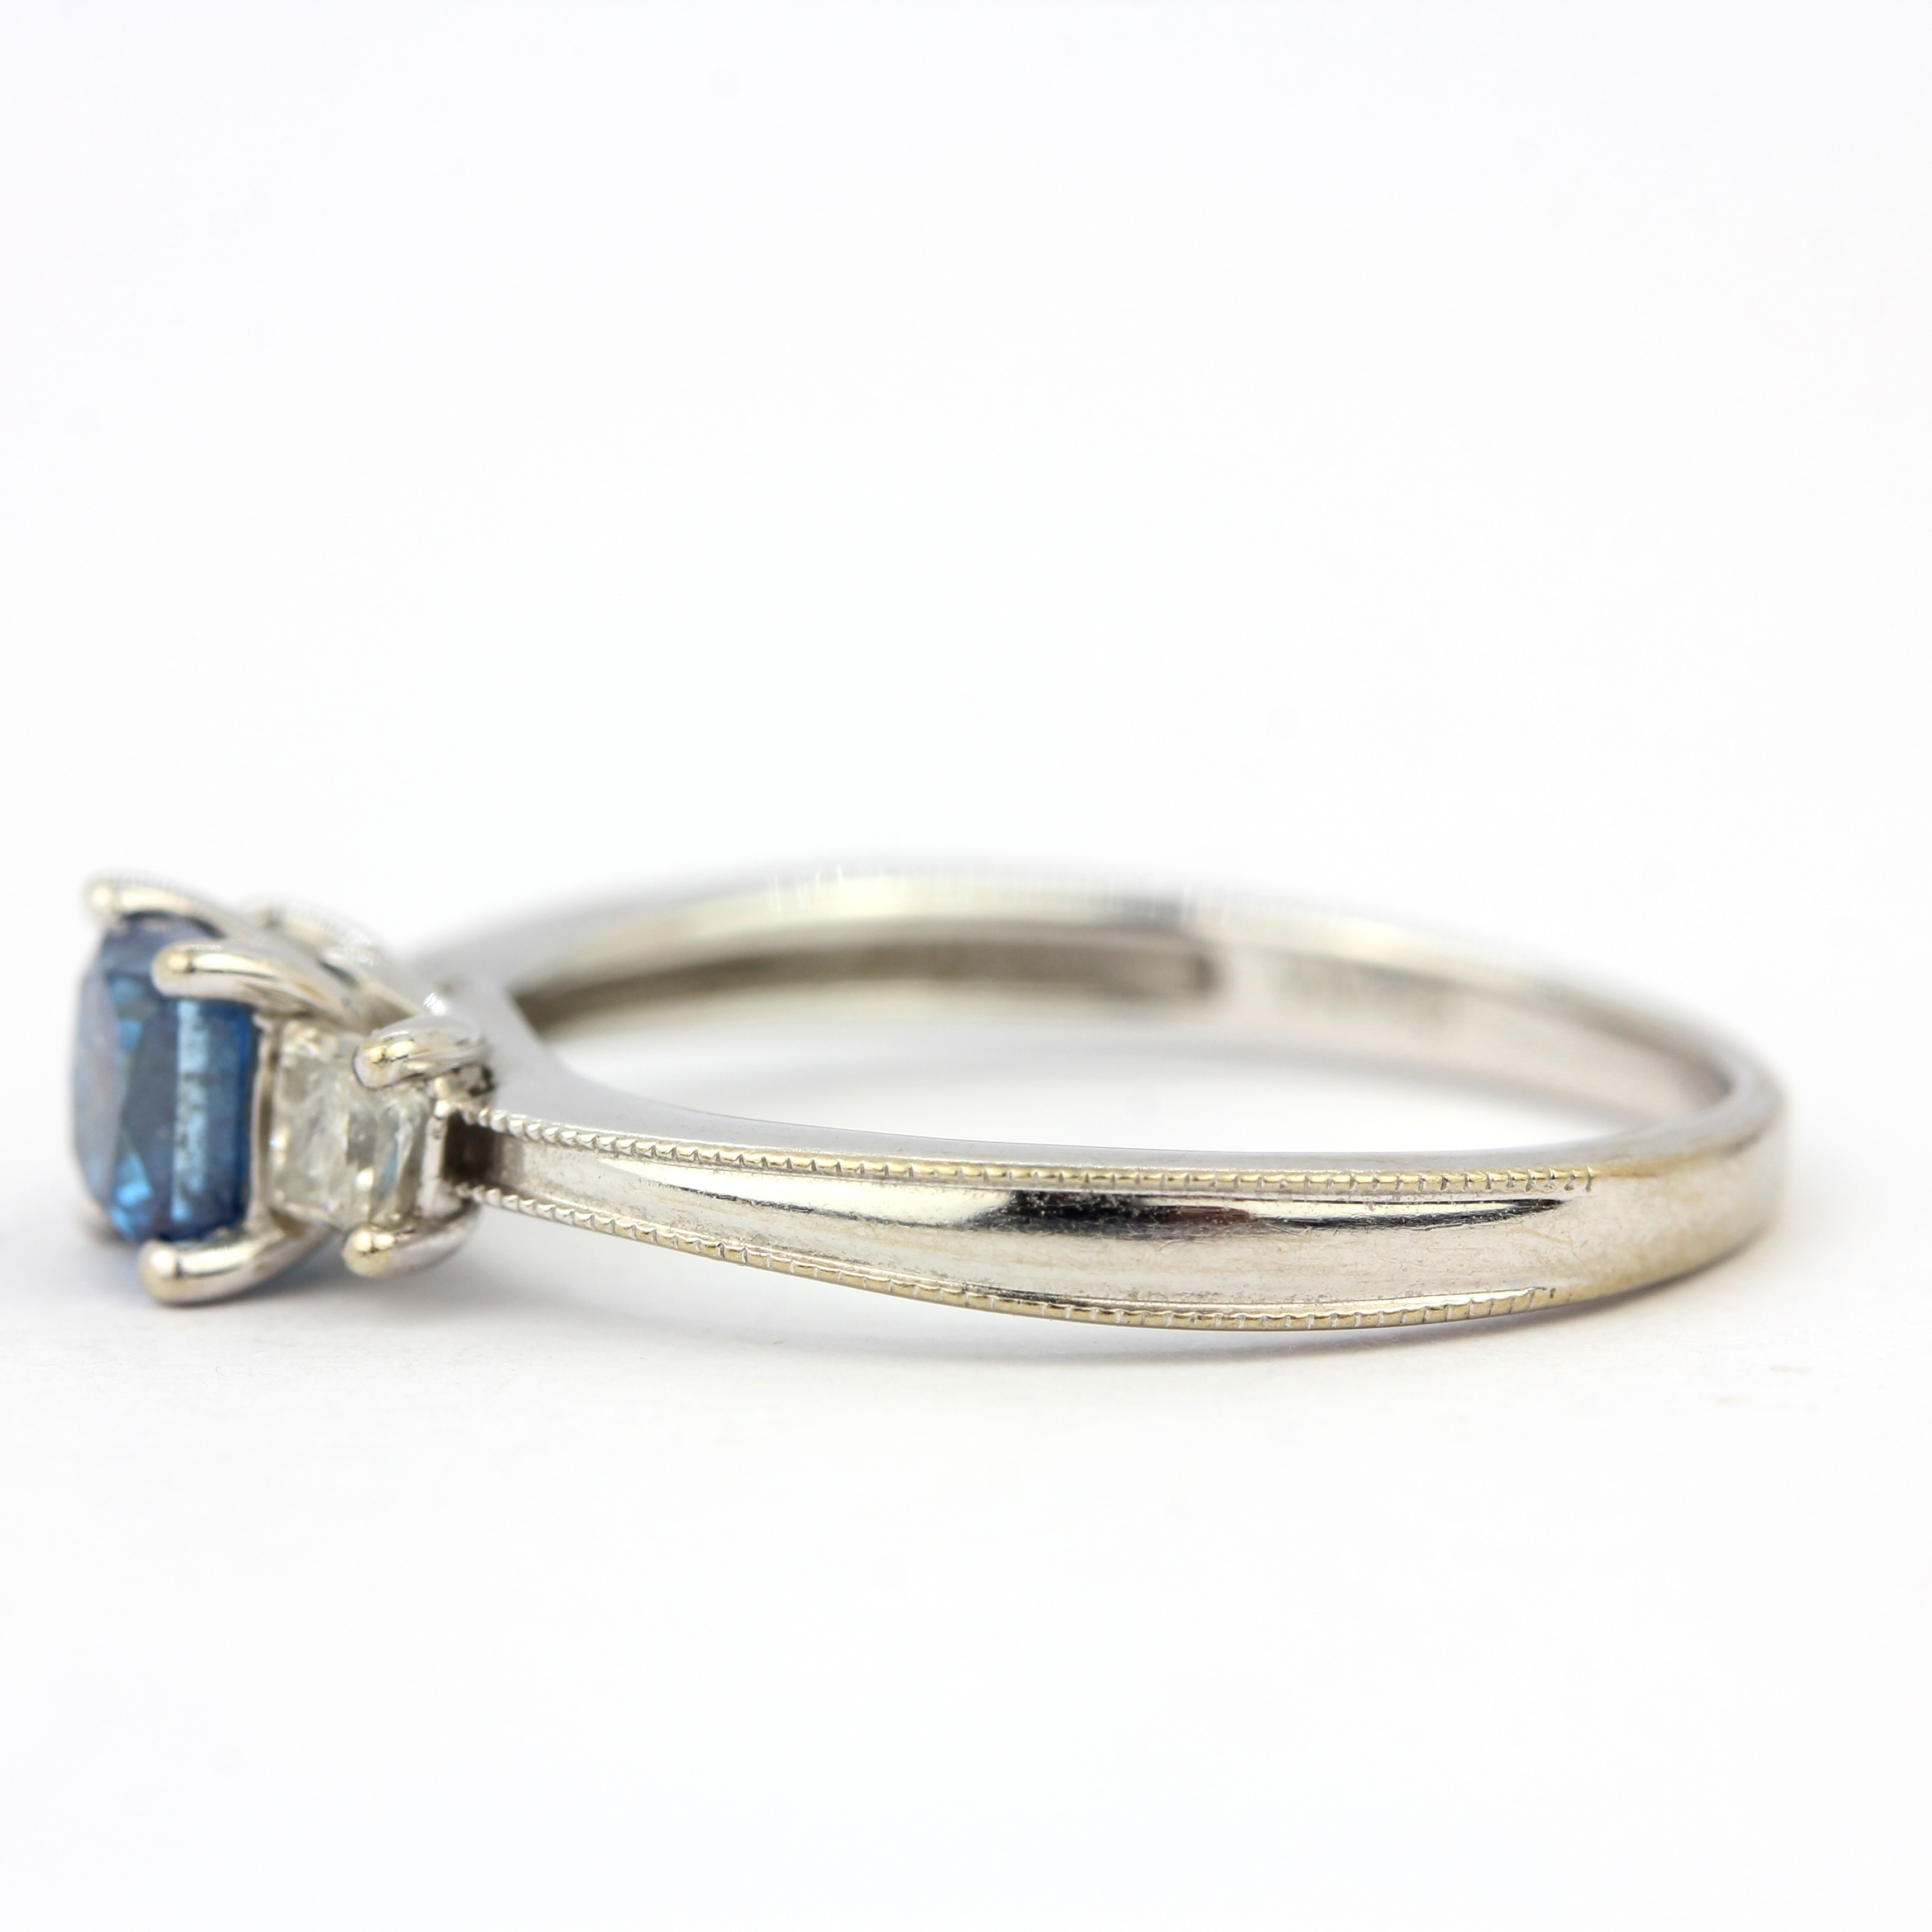 A 14ct white gold ring set with a princess cut fancy blue diamond and princess cut diamond set - Image 4 of 4